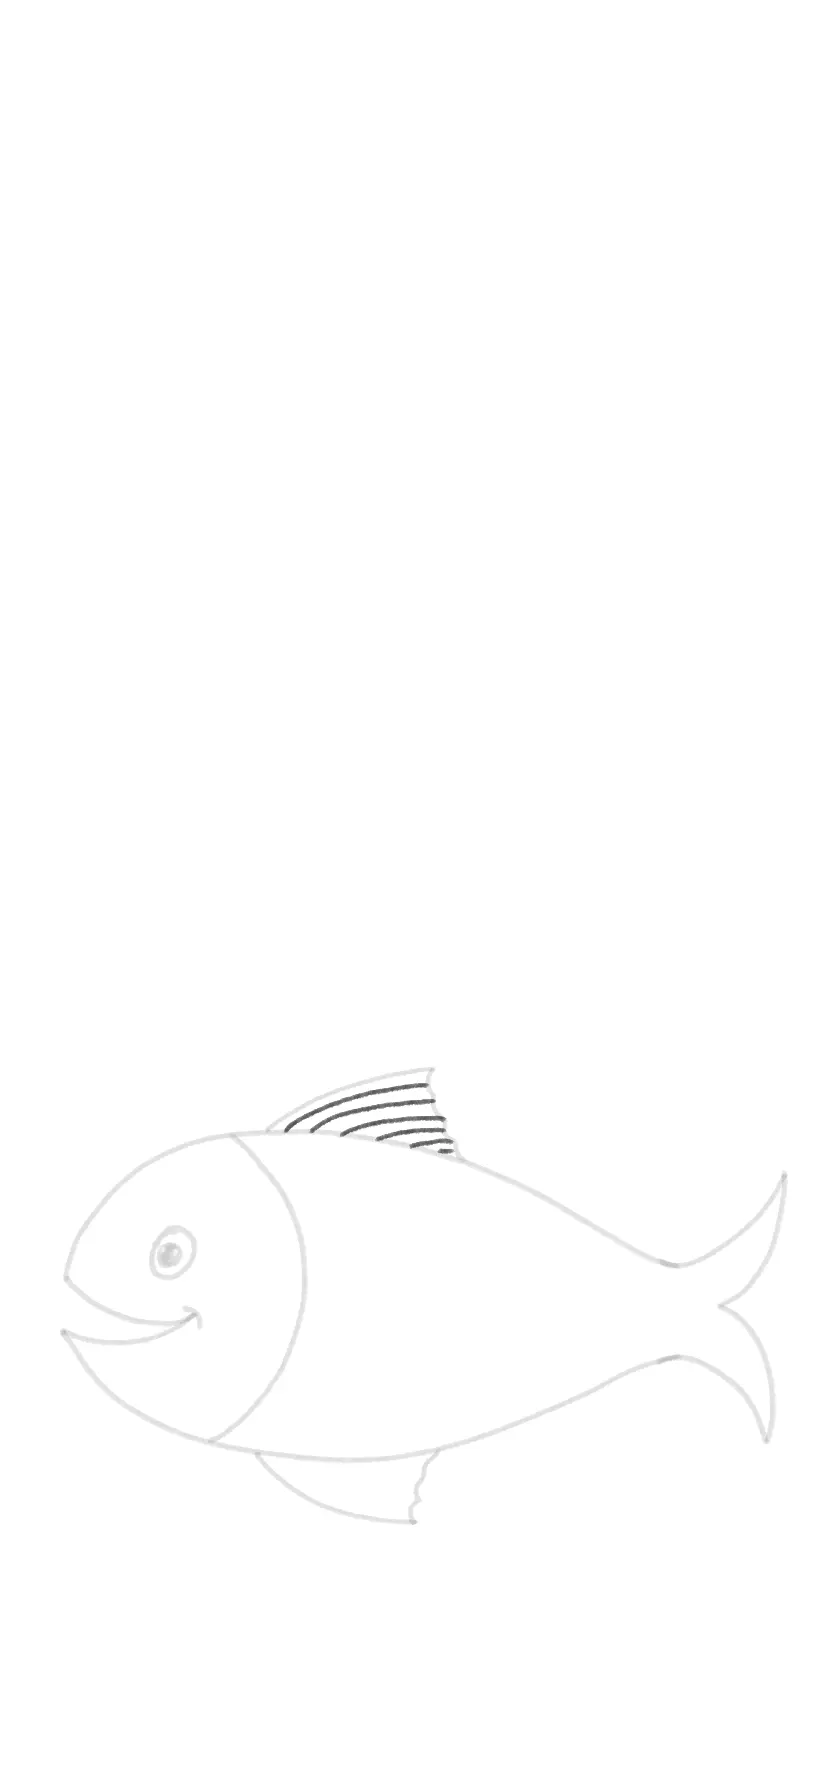 How to Draw an Easy Fish Step by Step-saigonsouth.com.vn